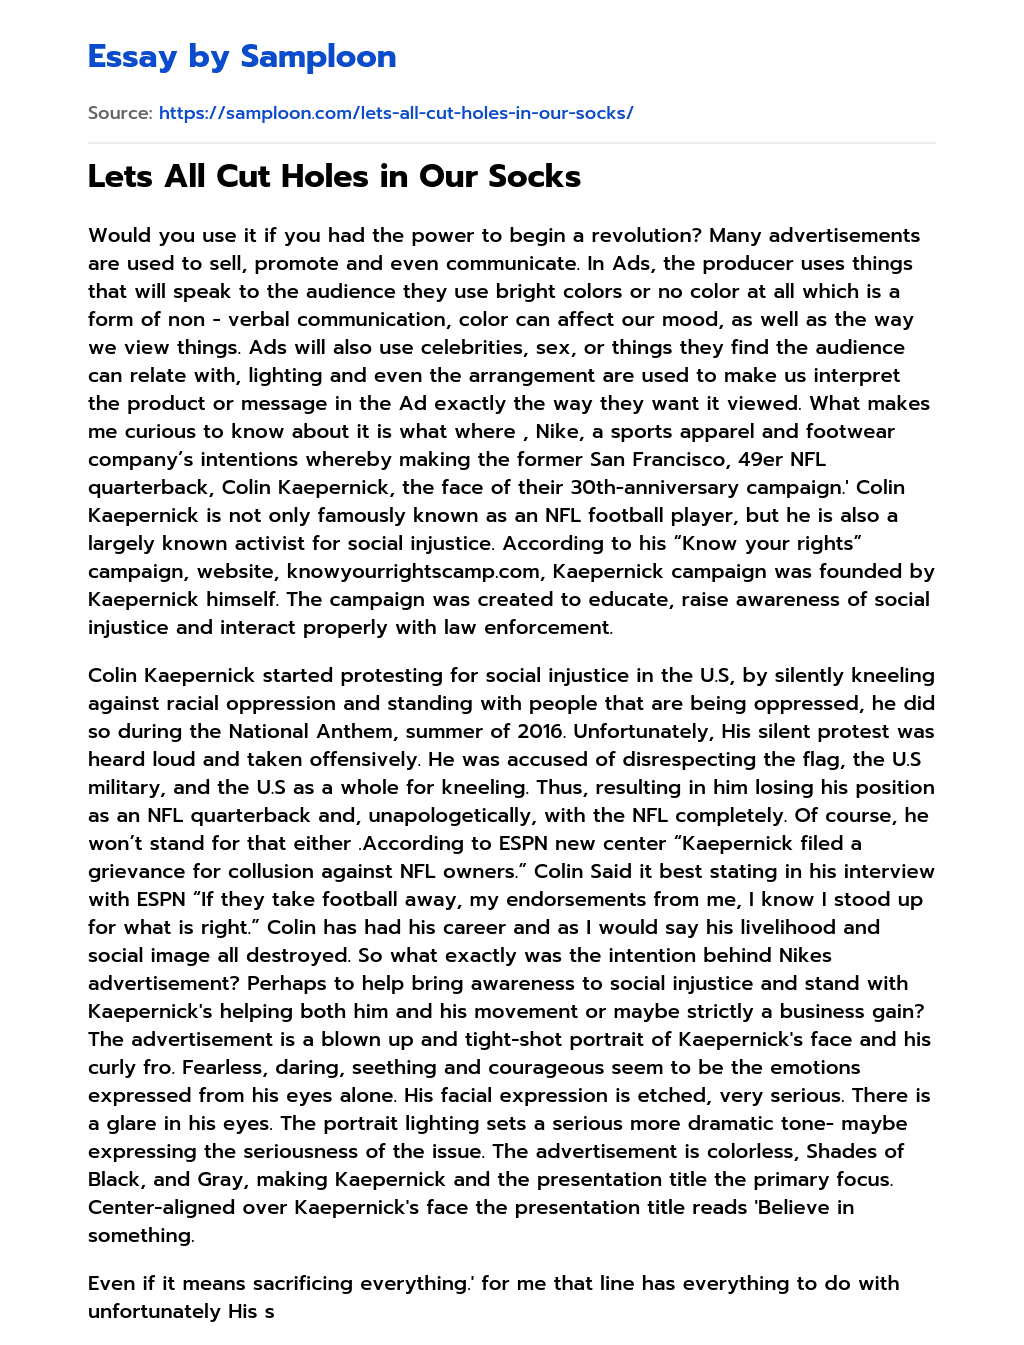 Lets All Cut Holes in Our Socks essay